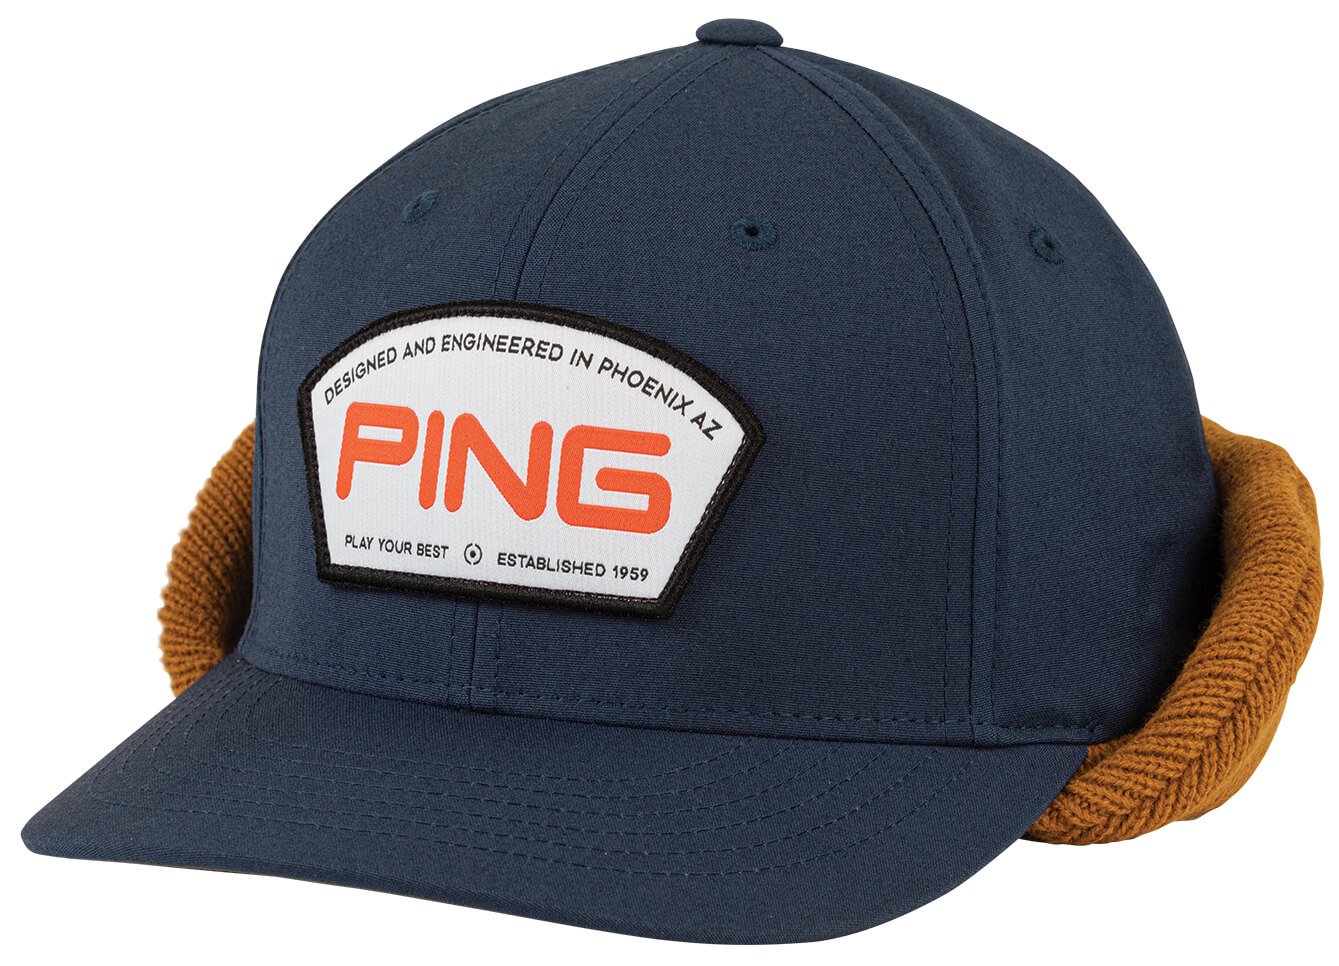 Save 16% on Ping Men's Hybrid Golf Hat, Cotton/polyester/spandex In Navy/buck